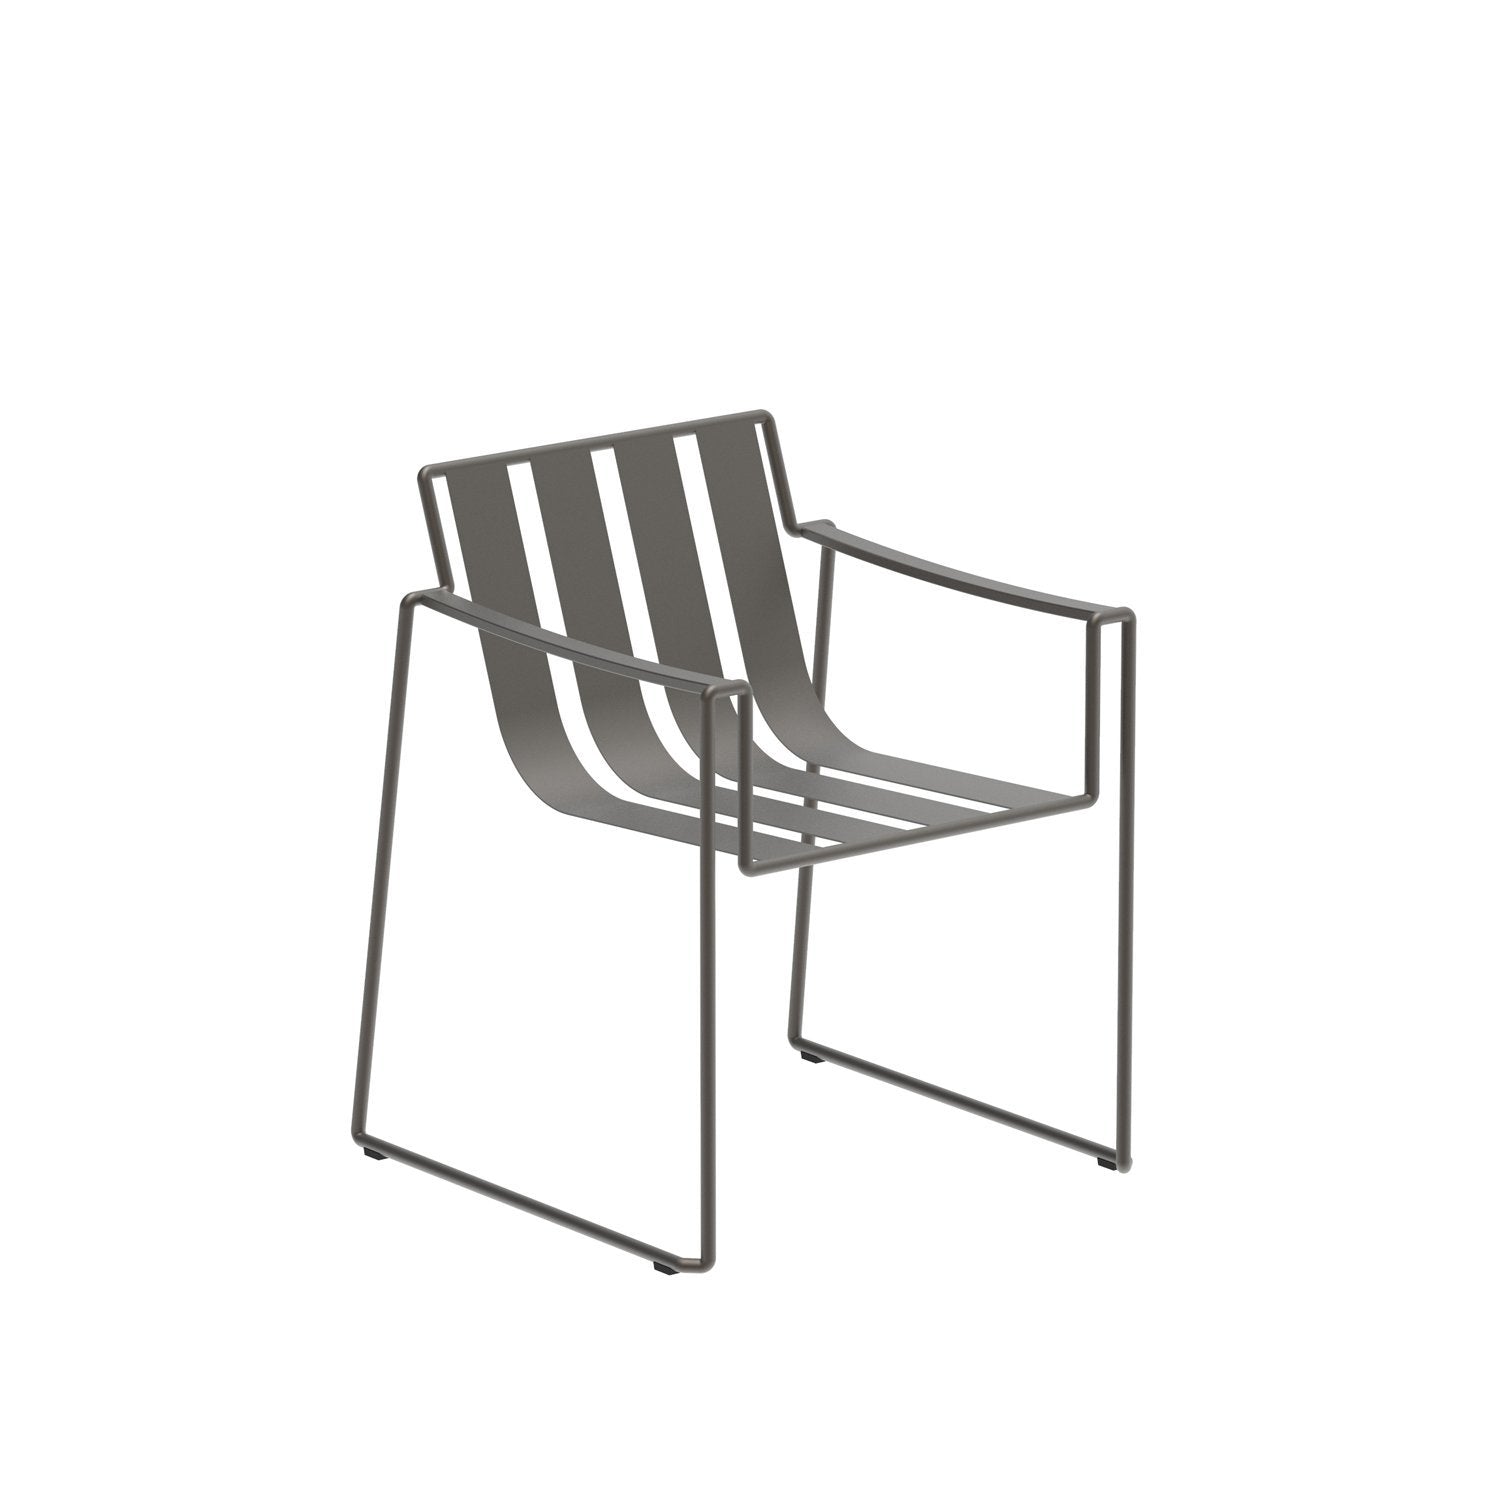 Strappy 55 chair with black frame